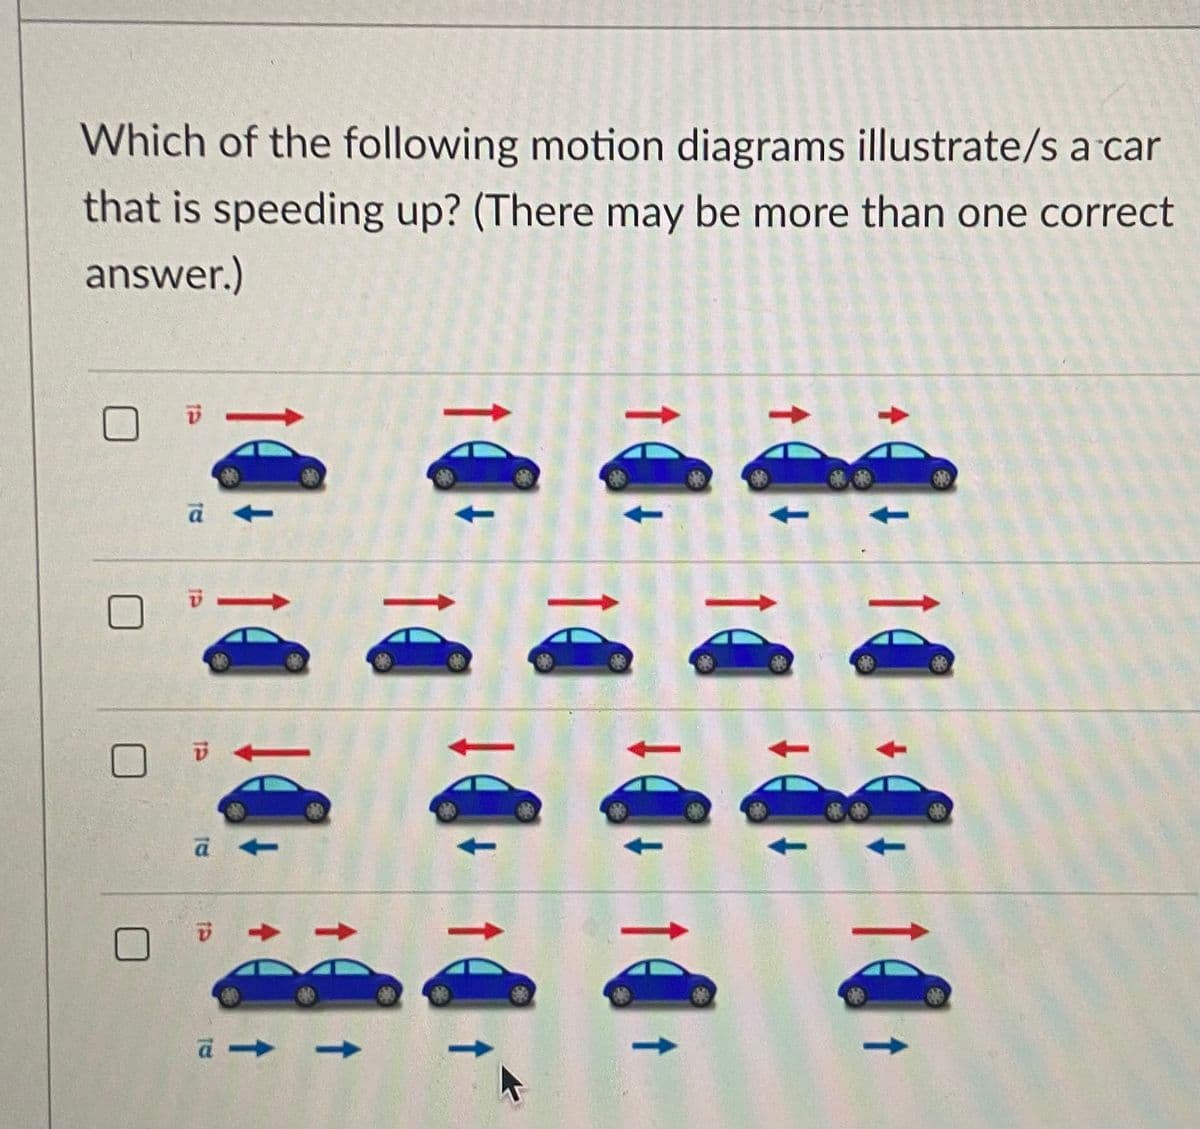 Which of the following motion diagrams illustrate/s a car
that is speeding up? (There may be more than one correct
answer.)
↑
↑
